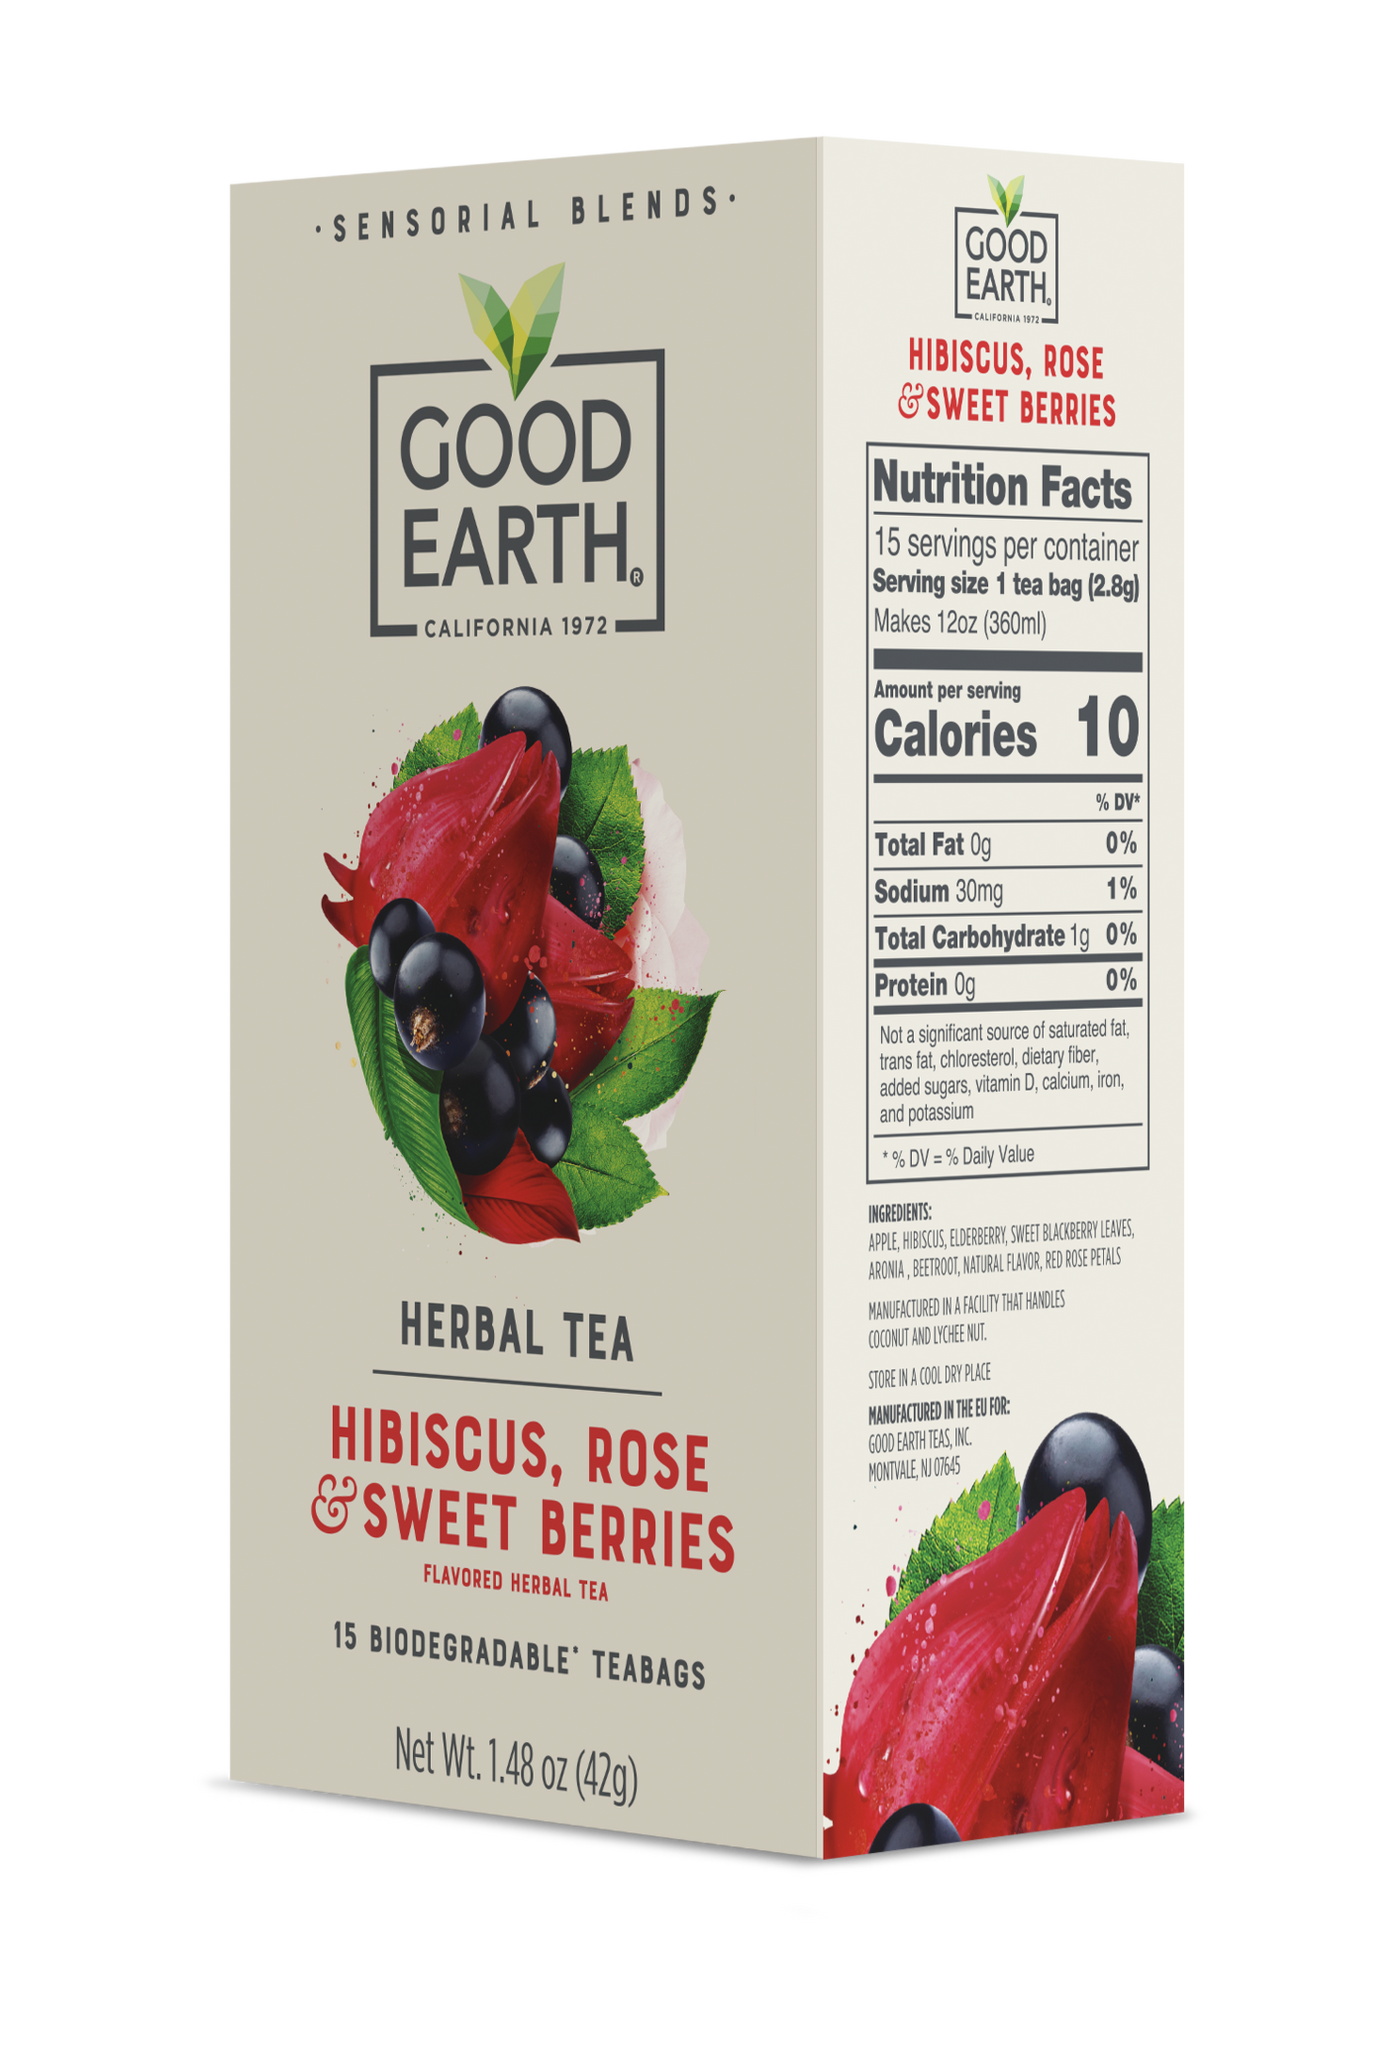 Hibiscus, Rose & Sweet Berries Nutrition Facts